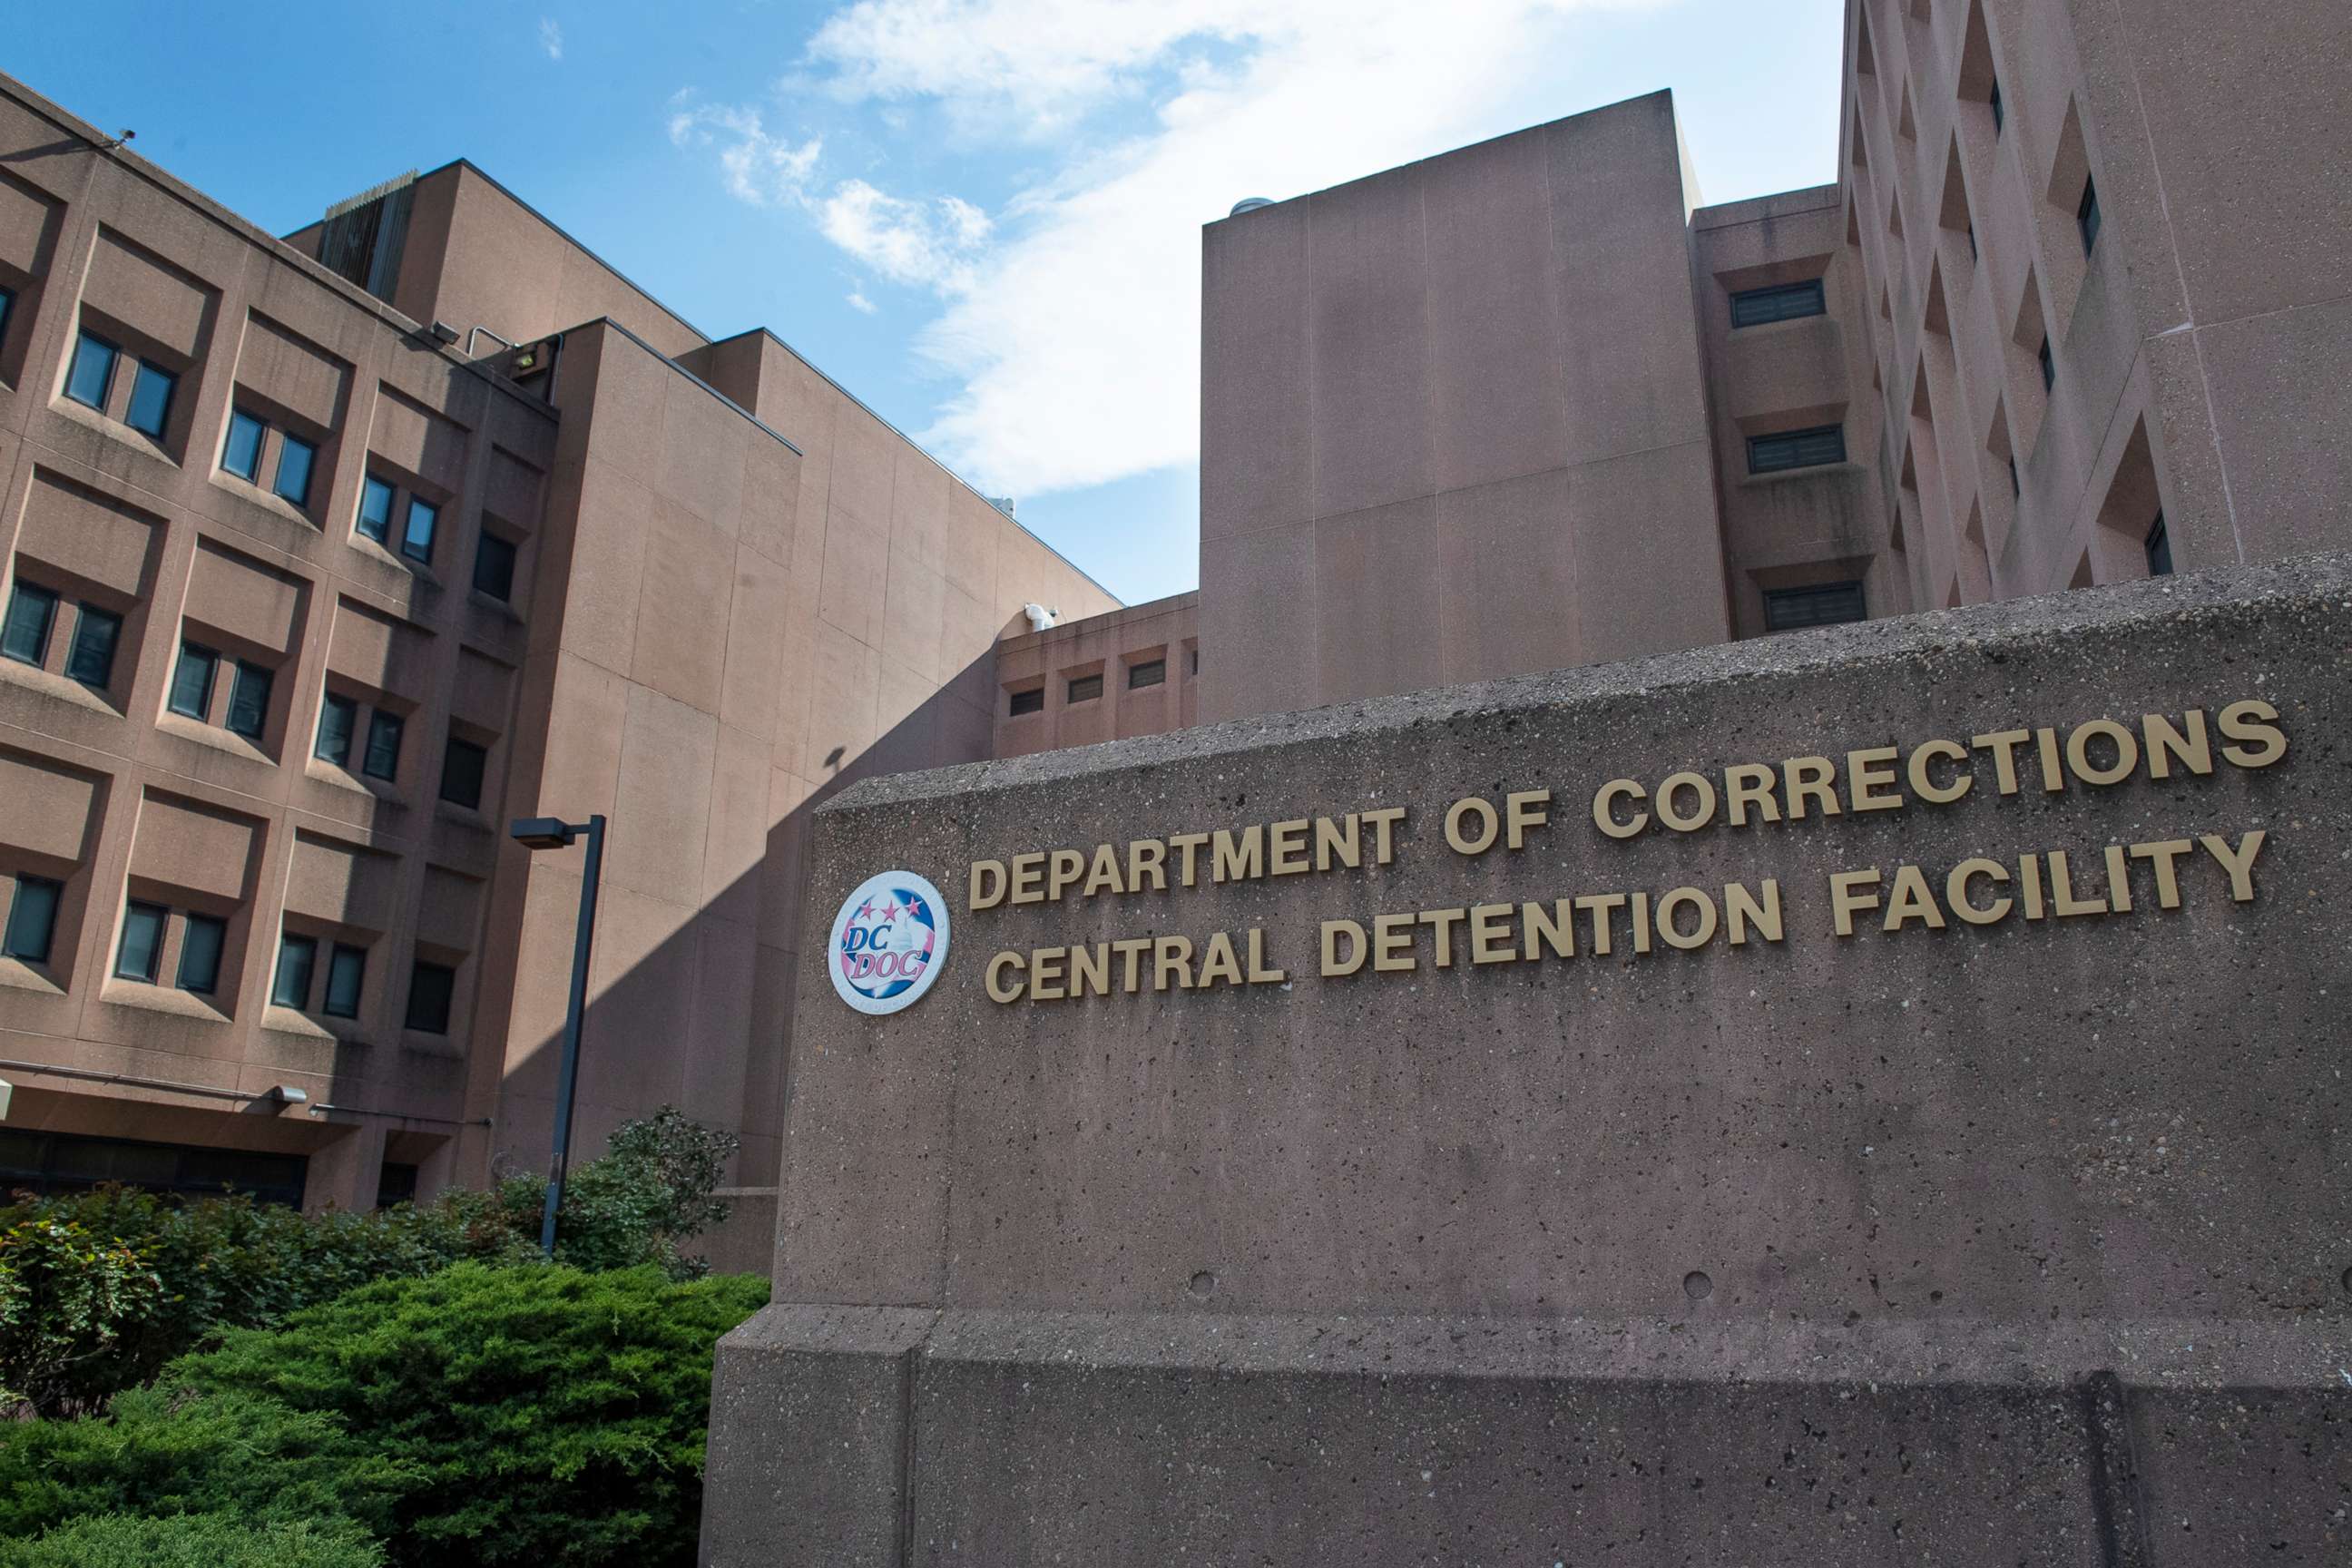 PHOTO: In this April 11, 2020, file photo, the Department of Corrections Central Detention Facility is pictured in Washington, D.C.